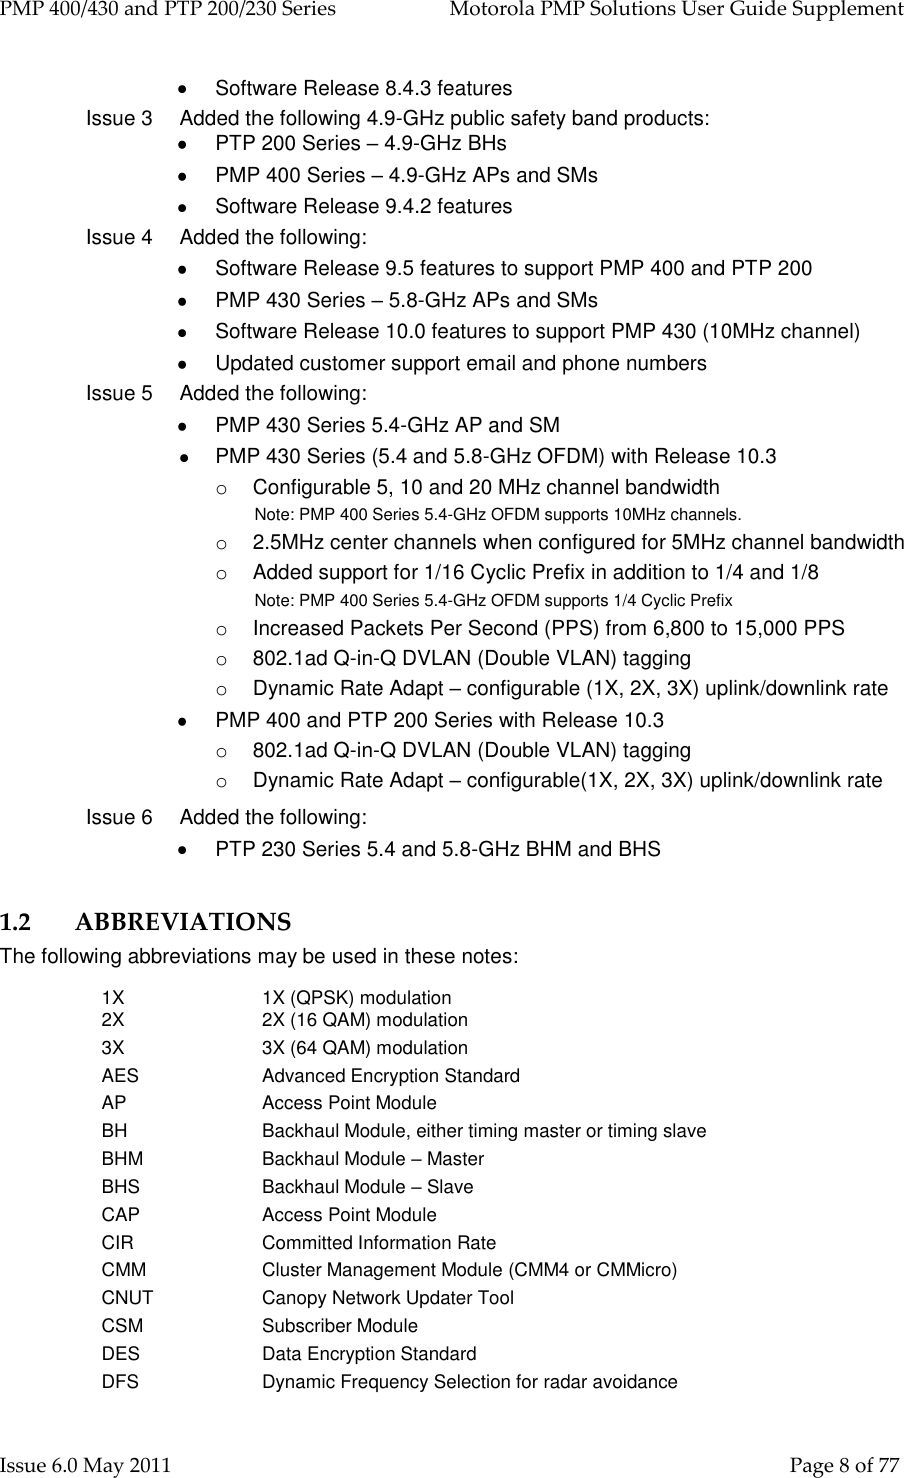 PMP 400/430 and PTP 200/230 Series   Motorola PMP Solutions User Guide Supplement Issue 6.0 May 2011    Page 8 of 77   Software Release 8.4.3 features Issue 3 Added the following 4.9-GHz public safety band products:   PTP 200 Series – 4.9-GHz BHs   PMP 400 Series – 4.9-GHz APs and SMs   Software Release 9.4.2 features Issue 4 Added the following:   Software Release 9.5 features to support PMP 400 and PTP 200   PMP 430 Series – 5.8-GHz APs and SMs   Software Release 10.0 features to support PMP 430 (10MHz channel)   Updated customer support email and phone numbers Issue 5 Added the following:   PMP 430 Series 5.4-GHz AP and SM   PMP 430 Series (5.4 and 5.8-GHz OFDM) with Release 10.3 o  Configurable 5, 10 and 20 MHz channel bandwidth Note: PMP 400 Series 5.4-GHz OFDM supports 10MHz channels. o  2.5MHz center channels when configured for 5MHz channel bandwidth o  Added support for 1/16 Cyclic Prefix in addition to 1/4 and 1/8 Note: PMP 400 Series 5.4-GHz OFDM supports 1/4 Cyclic Prefix o  Increased Packets Per Second (PPS) from 6,800 to 15,000 PPS o  802.1ad Q-in-Q DVLAN (Double VLAN) tagging o  Dynamic Rate Adapt – configurable (1X, 2X, 3X) uplink/downlink rate   PMP 400 and PTP 200 Series with Release 10.3 o  802.1ad Q-in-Q DVLAN (Double VLAN) tagging o  Dynamic Rate Adapt – configurable(1X, 2X, 3X) uplink/downlink rate Issue 6 Added the following:   PTP 230 Series 5.4 and 5.8-GHz BHM and BHS 1.2 ABBREVIATIONS The following abbreviations may be used in these notes: 1X 1X (QPSK) modulation 2X 2X (16 QAM) modulation 3X 3X (64 QAM) modulation AES AP Advanced Encryption Standard Access Point Module BH Backhaul Module, either timing master or timing slave BHM Backhaul Module – Master BHS CAP CIR Backhaul Module – Slave Access Point Module Committed Information Rate CMM Cluster Management Module (CMM4 or CMMicro) CNUT CSM Canopy Network Updater Tool Subscriber Module DES DFS Data Encryption Standard Dynamic Frequency Selection for radar avoidance 